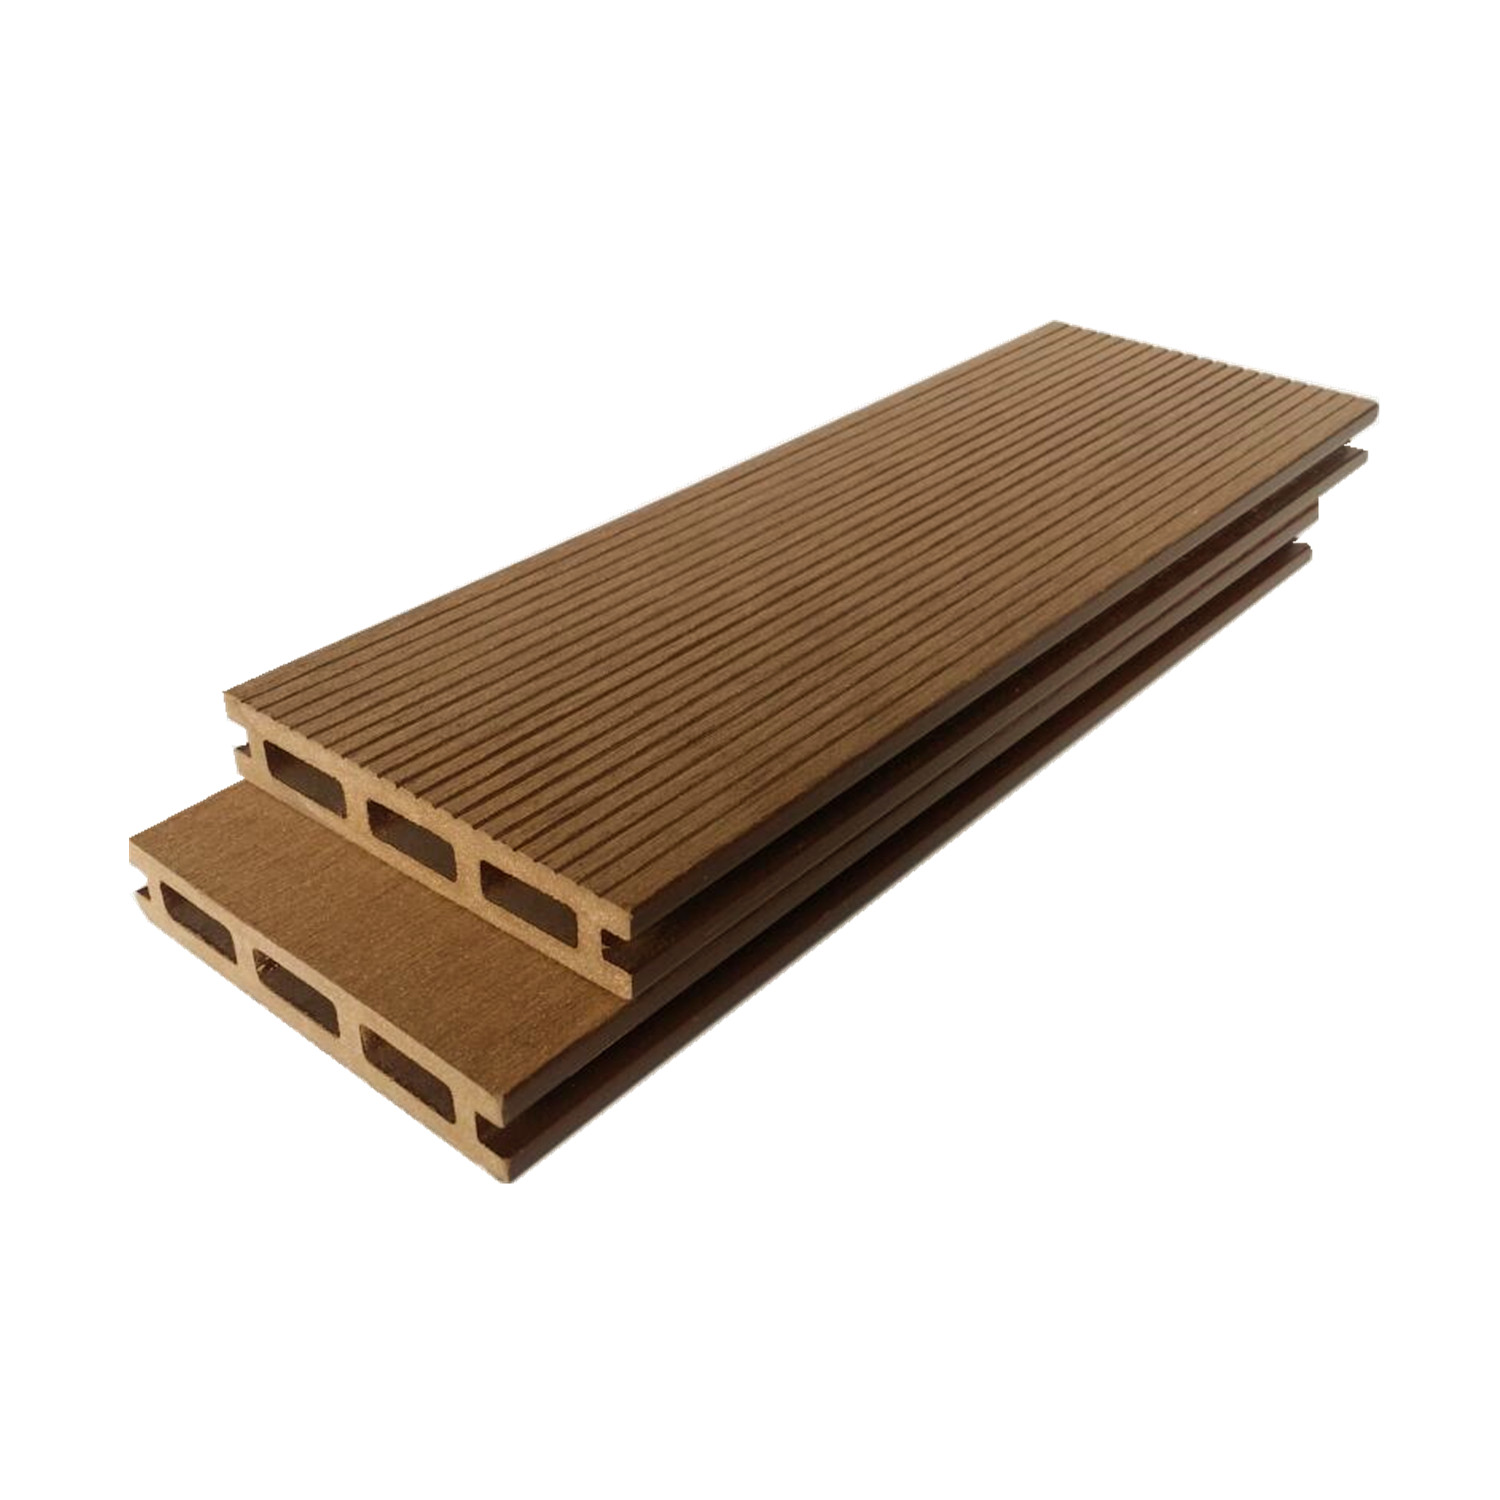 Co-extruded Decking Second Generation Wpc Decking Composite Floor